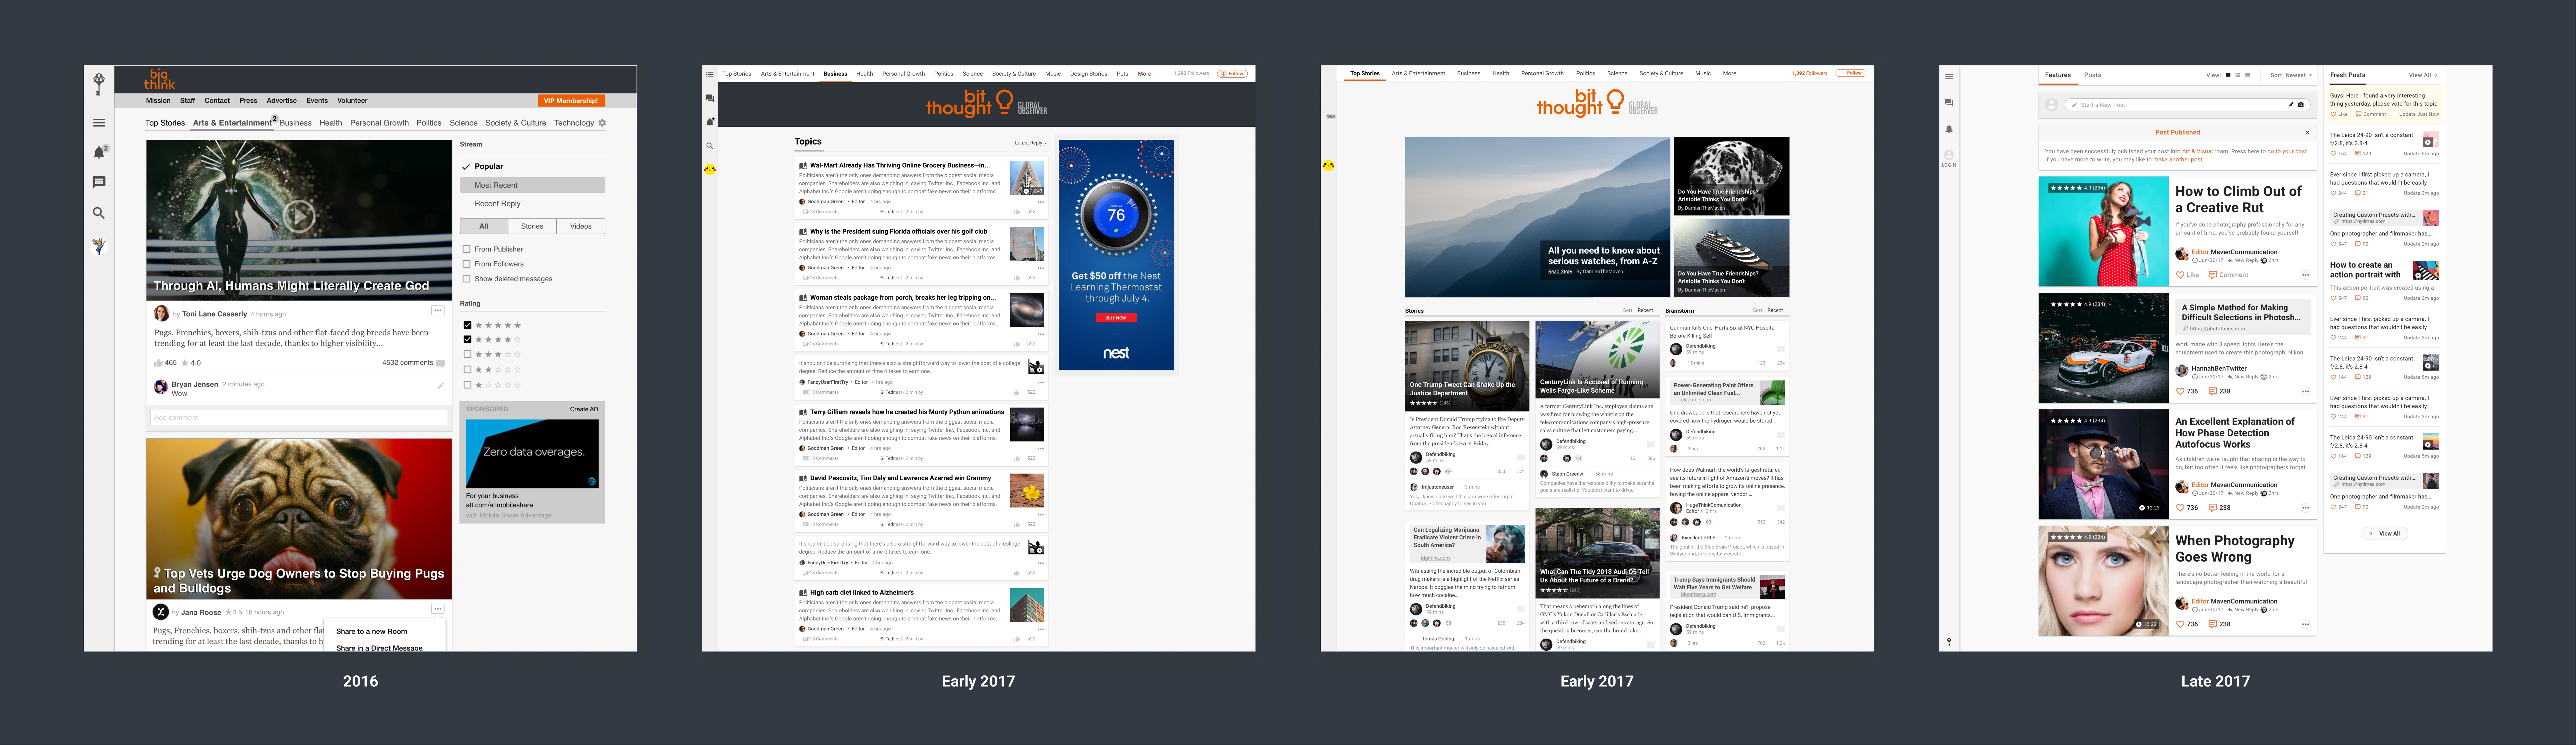 Our iterative journey: Stream View - showcase image